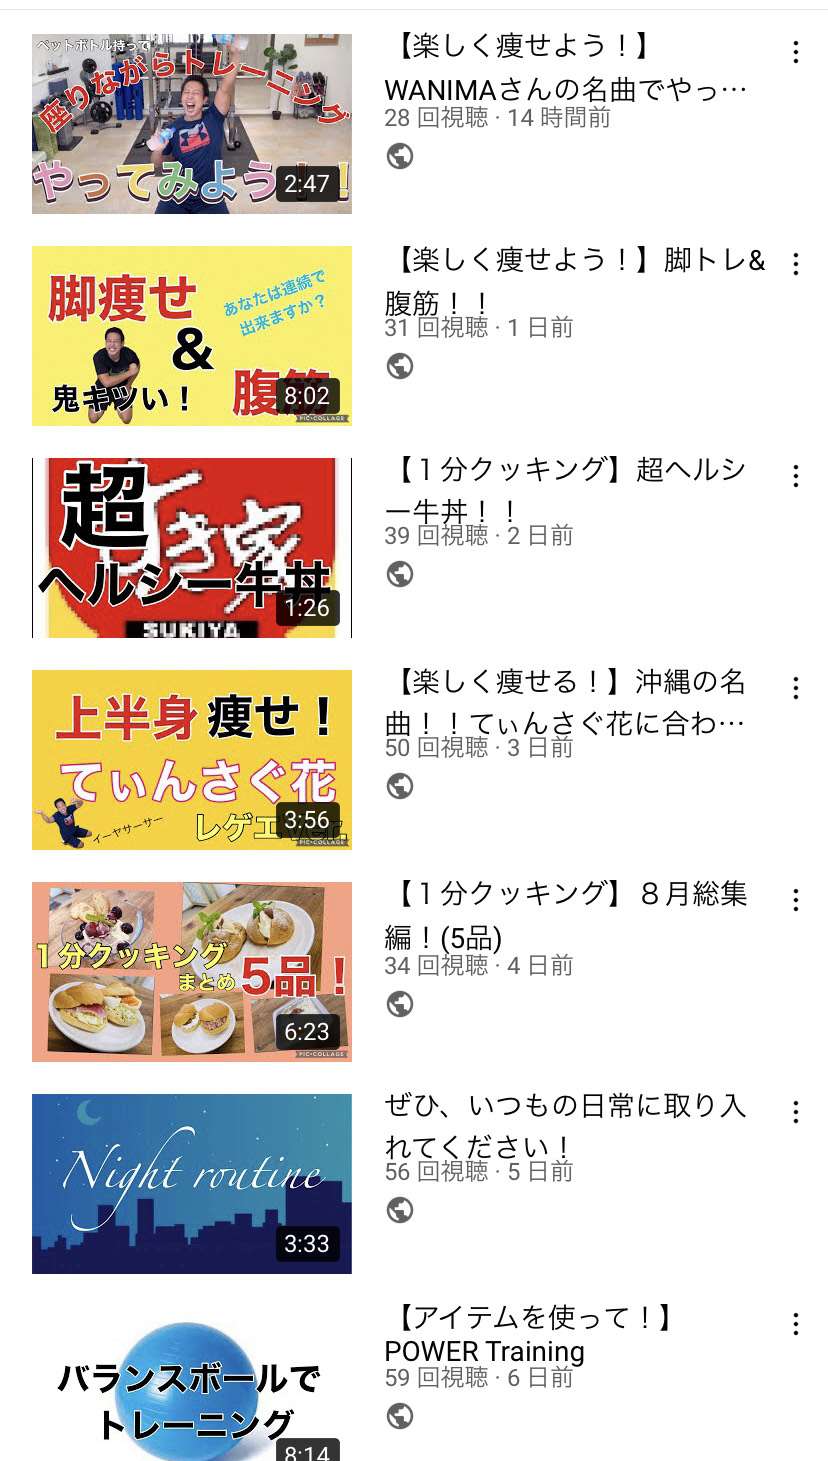 YouTubeを見ながら自宅で筋トレ！！